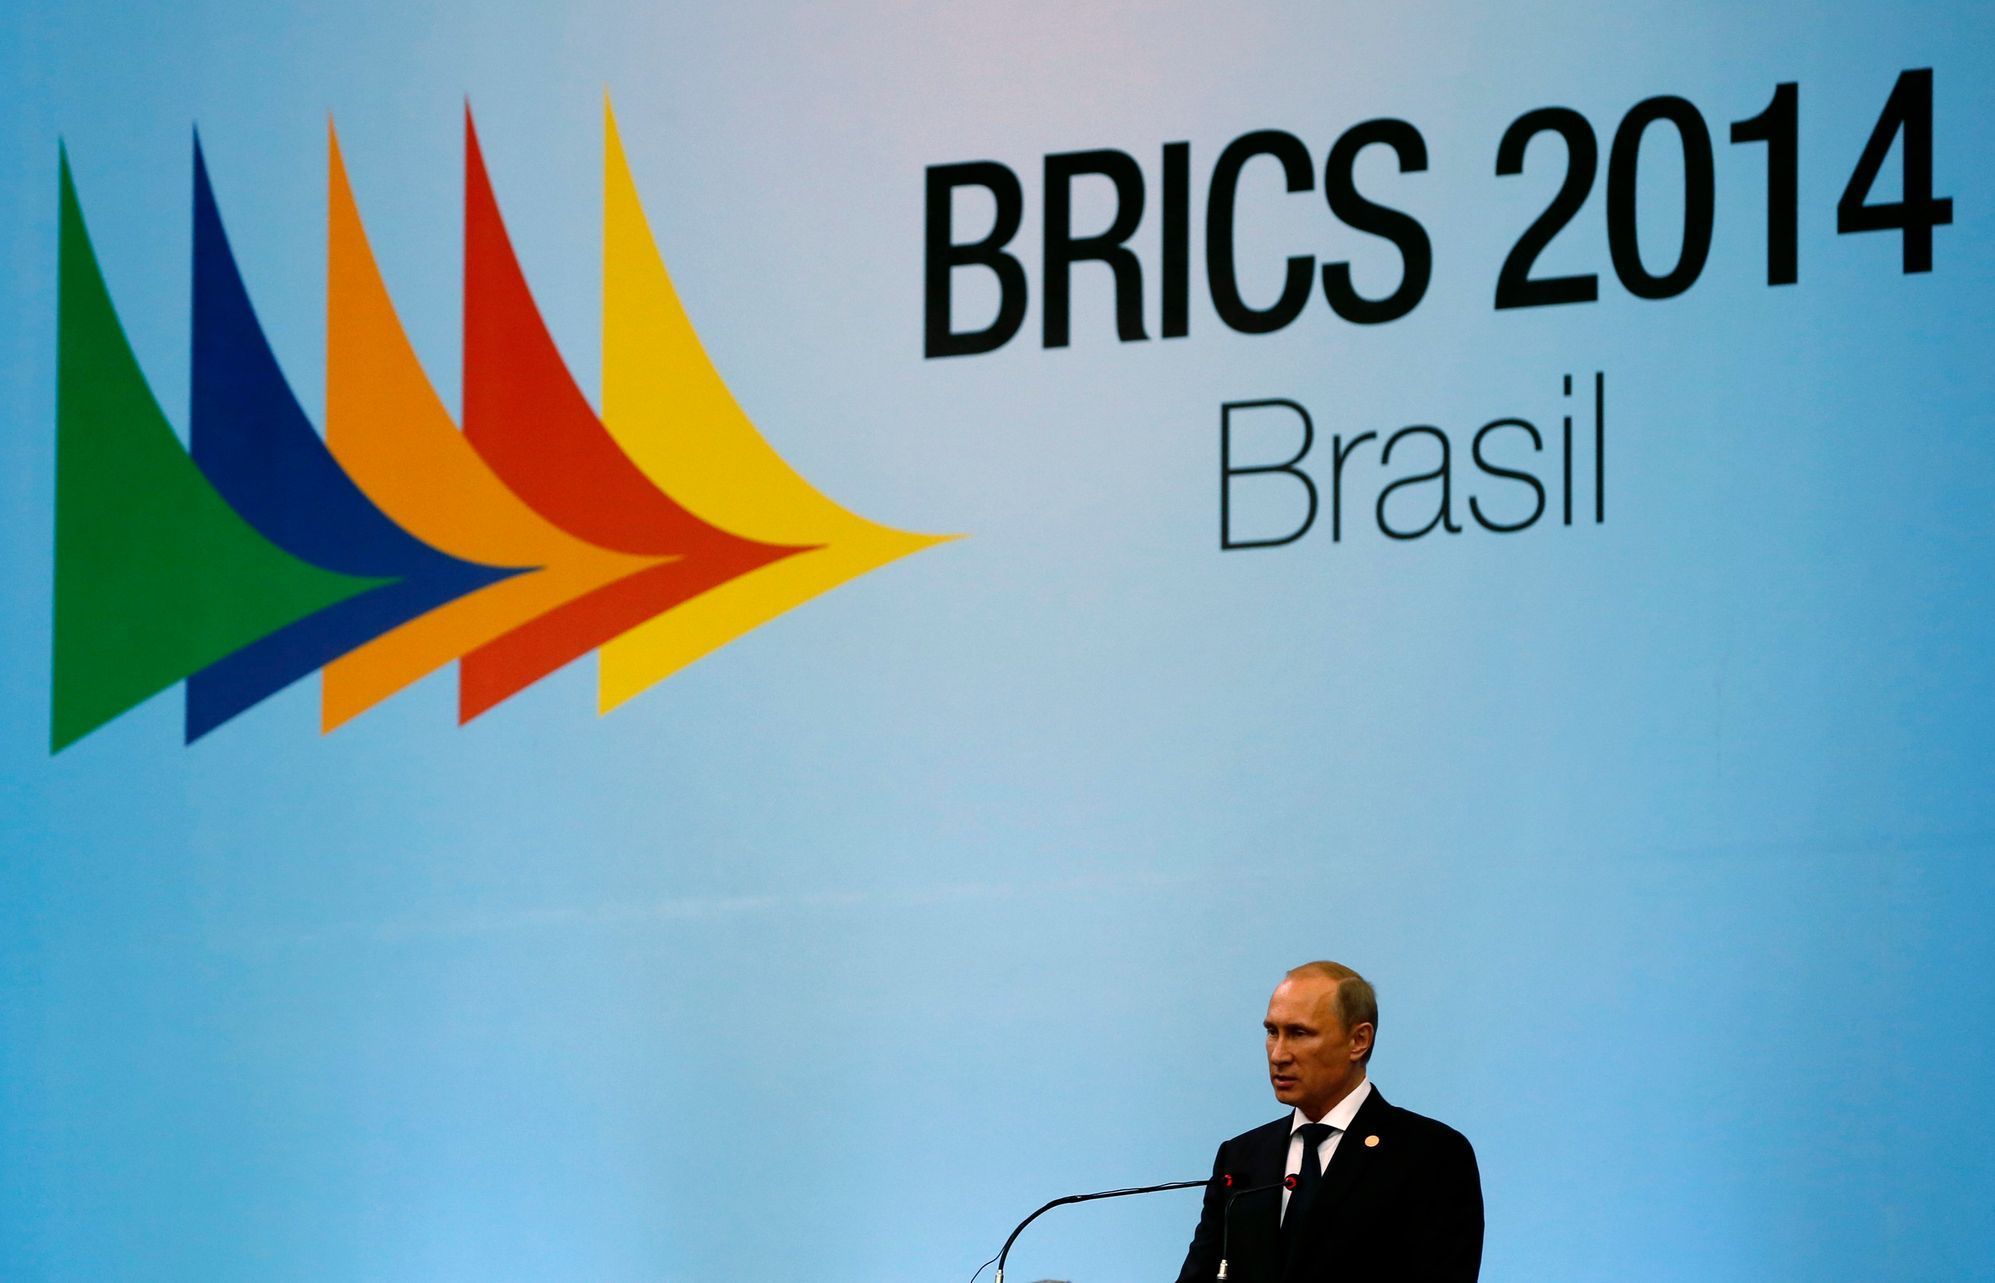 Russia's President Putin delivers a speech as he attends the VI BRICS Summit in Fortaleza